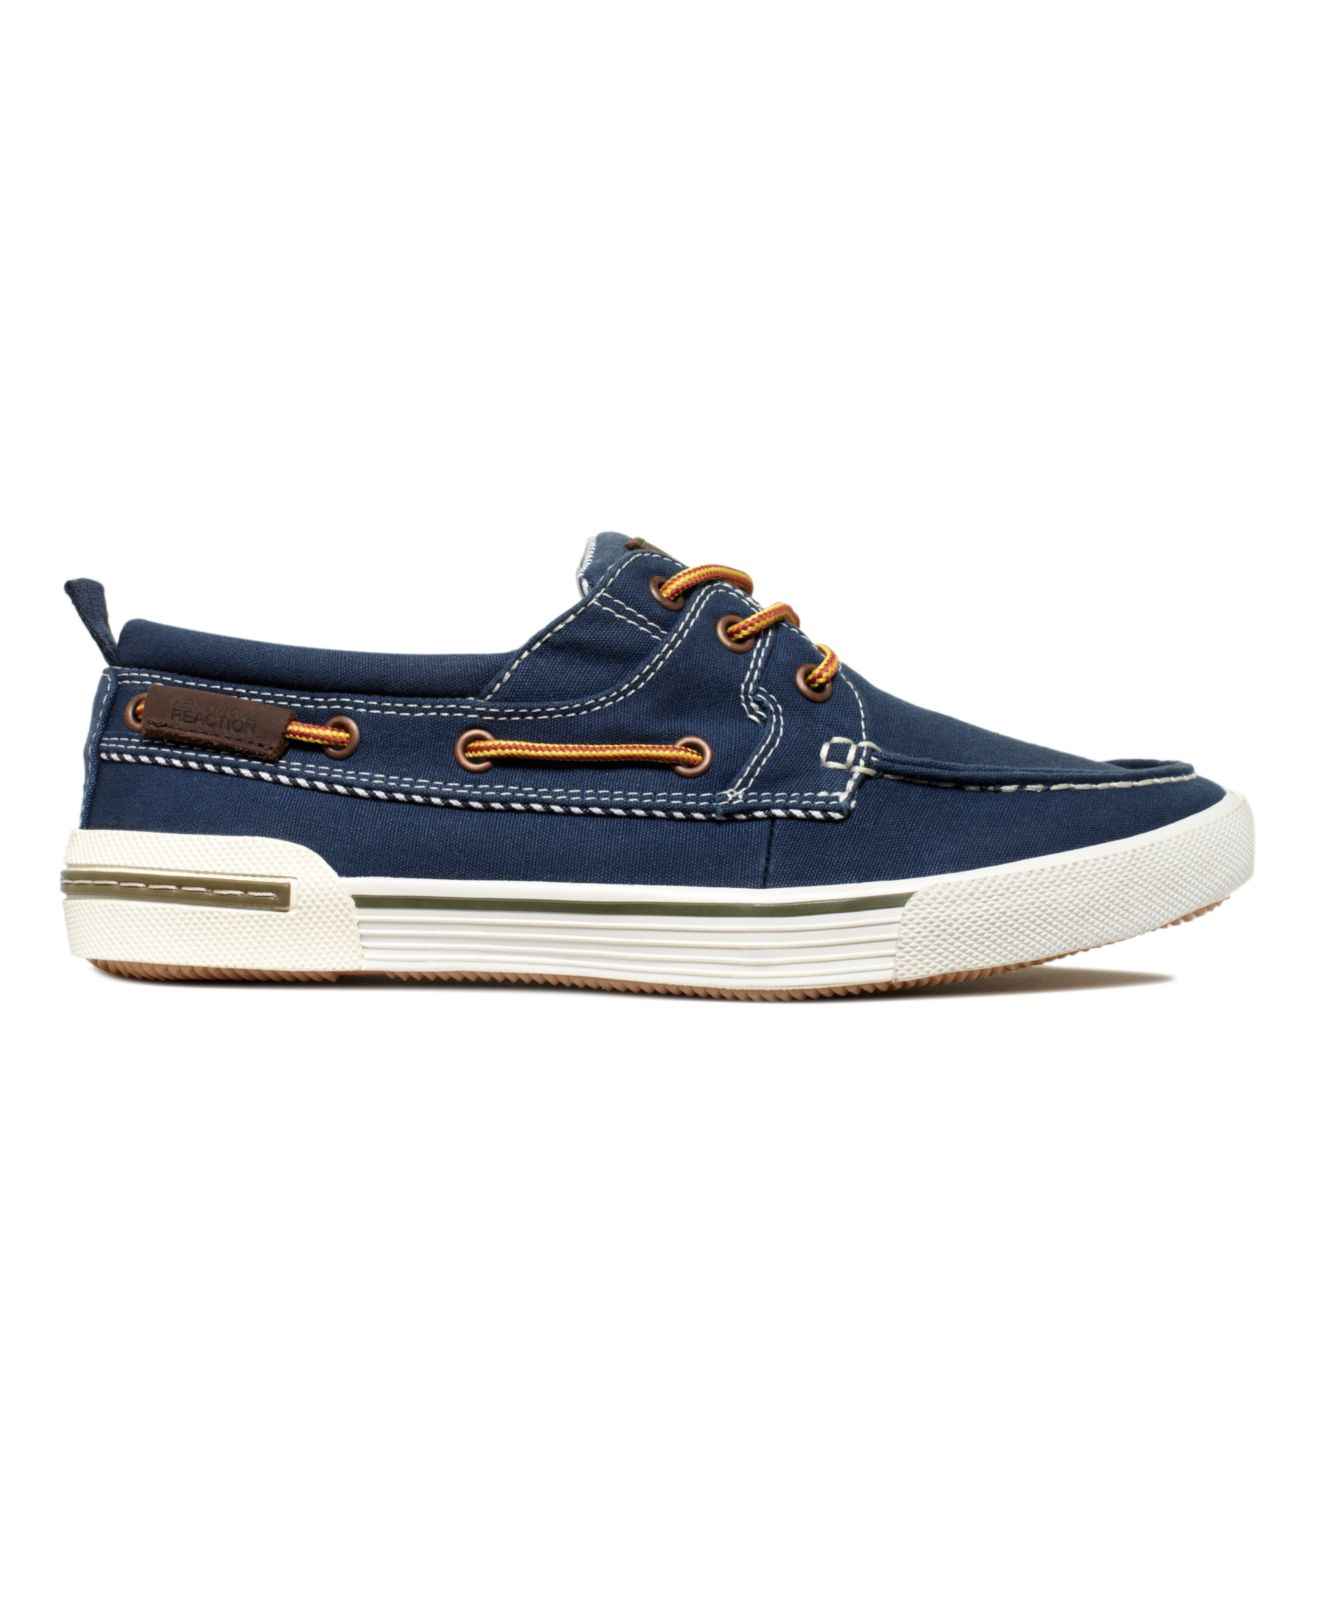 Kenneth Cole Reaction Toss The Anchor Canvas Boat Shoes in Navy (Blue ...